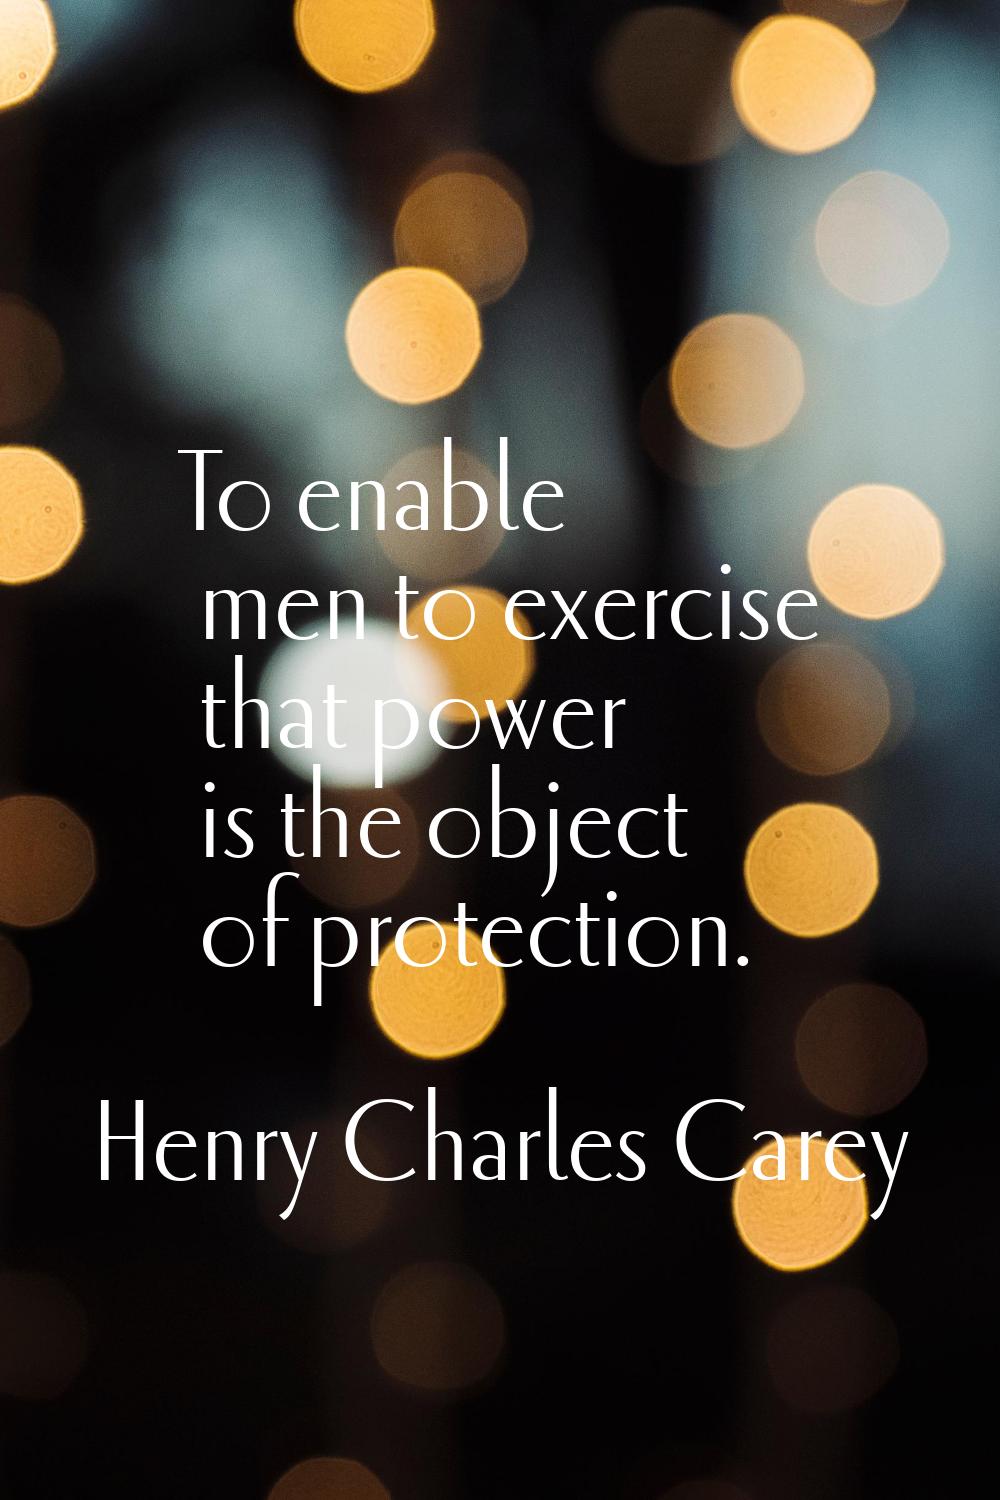 To enable men to exercise that power is the object of protection.